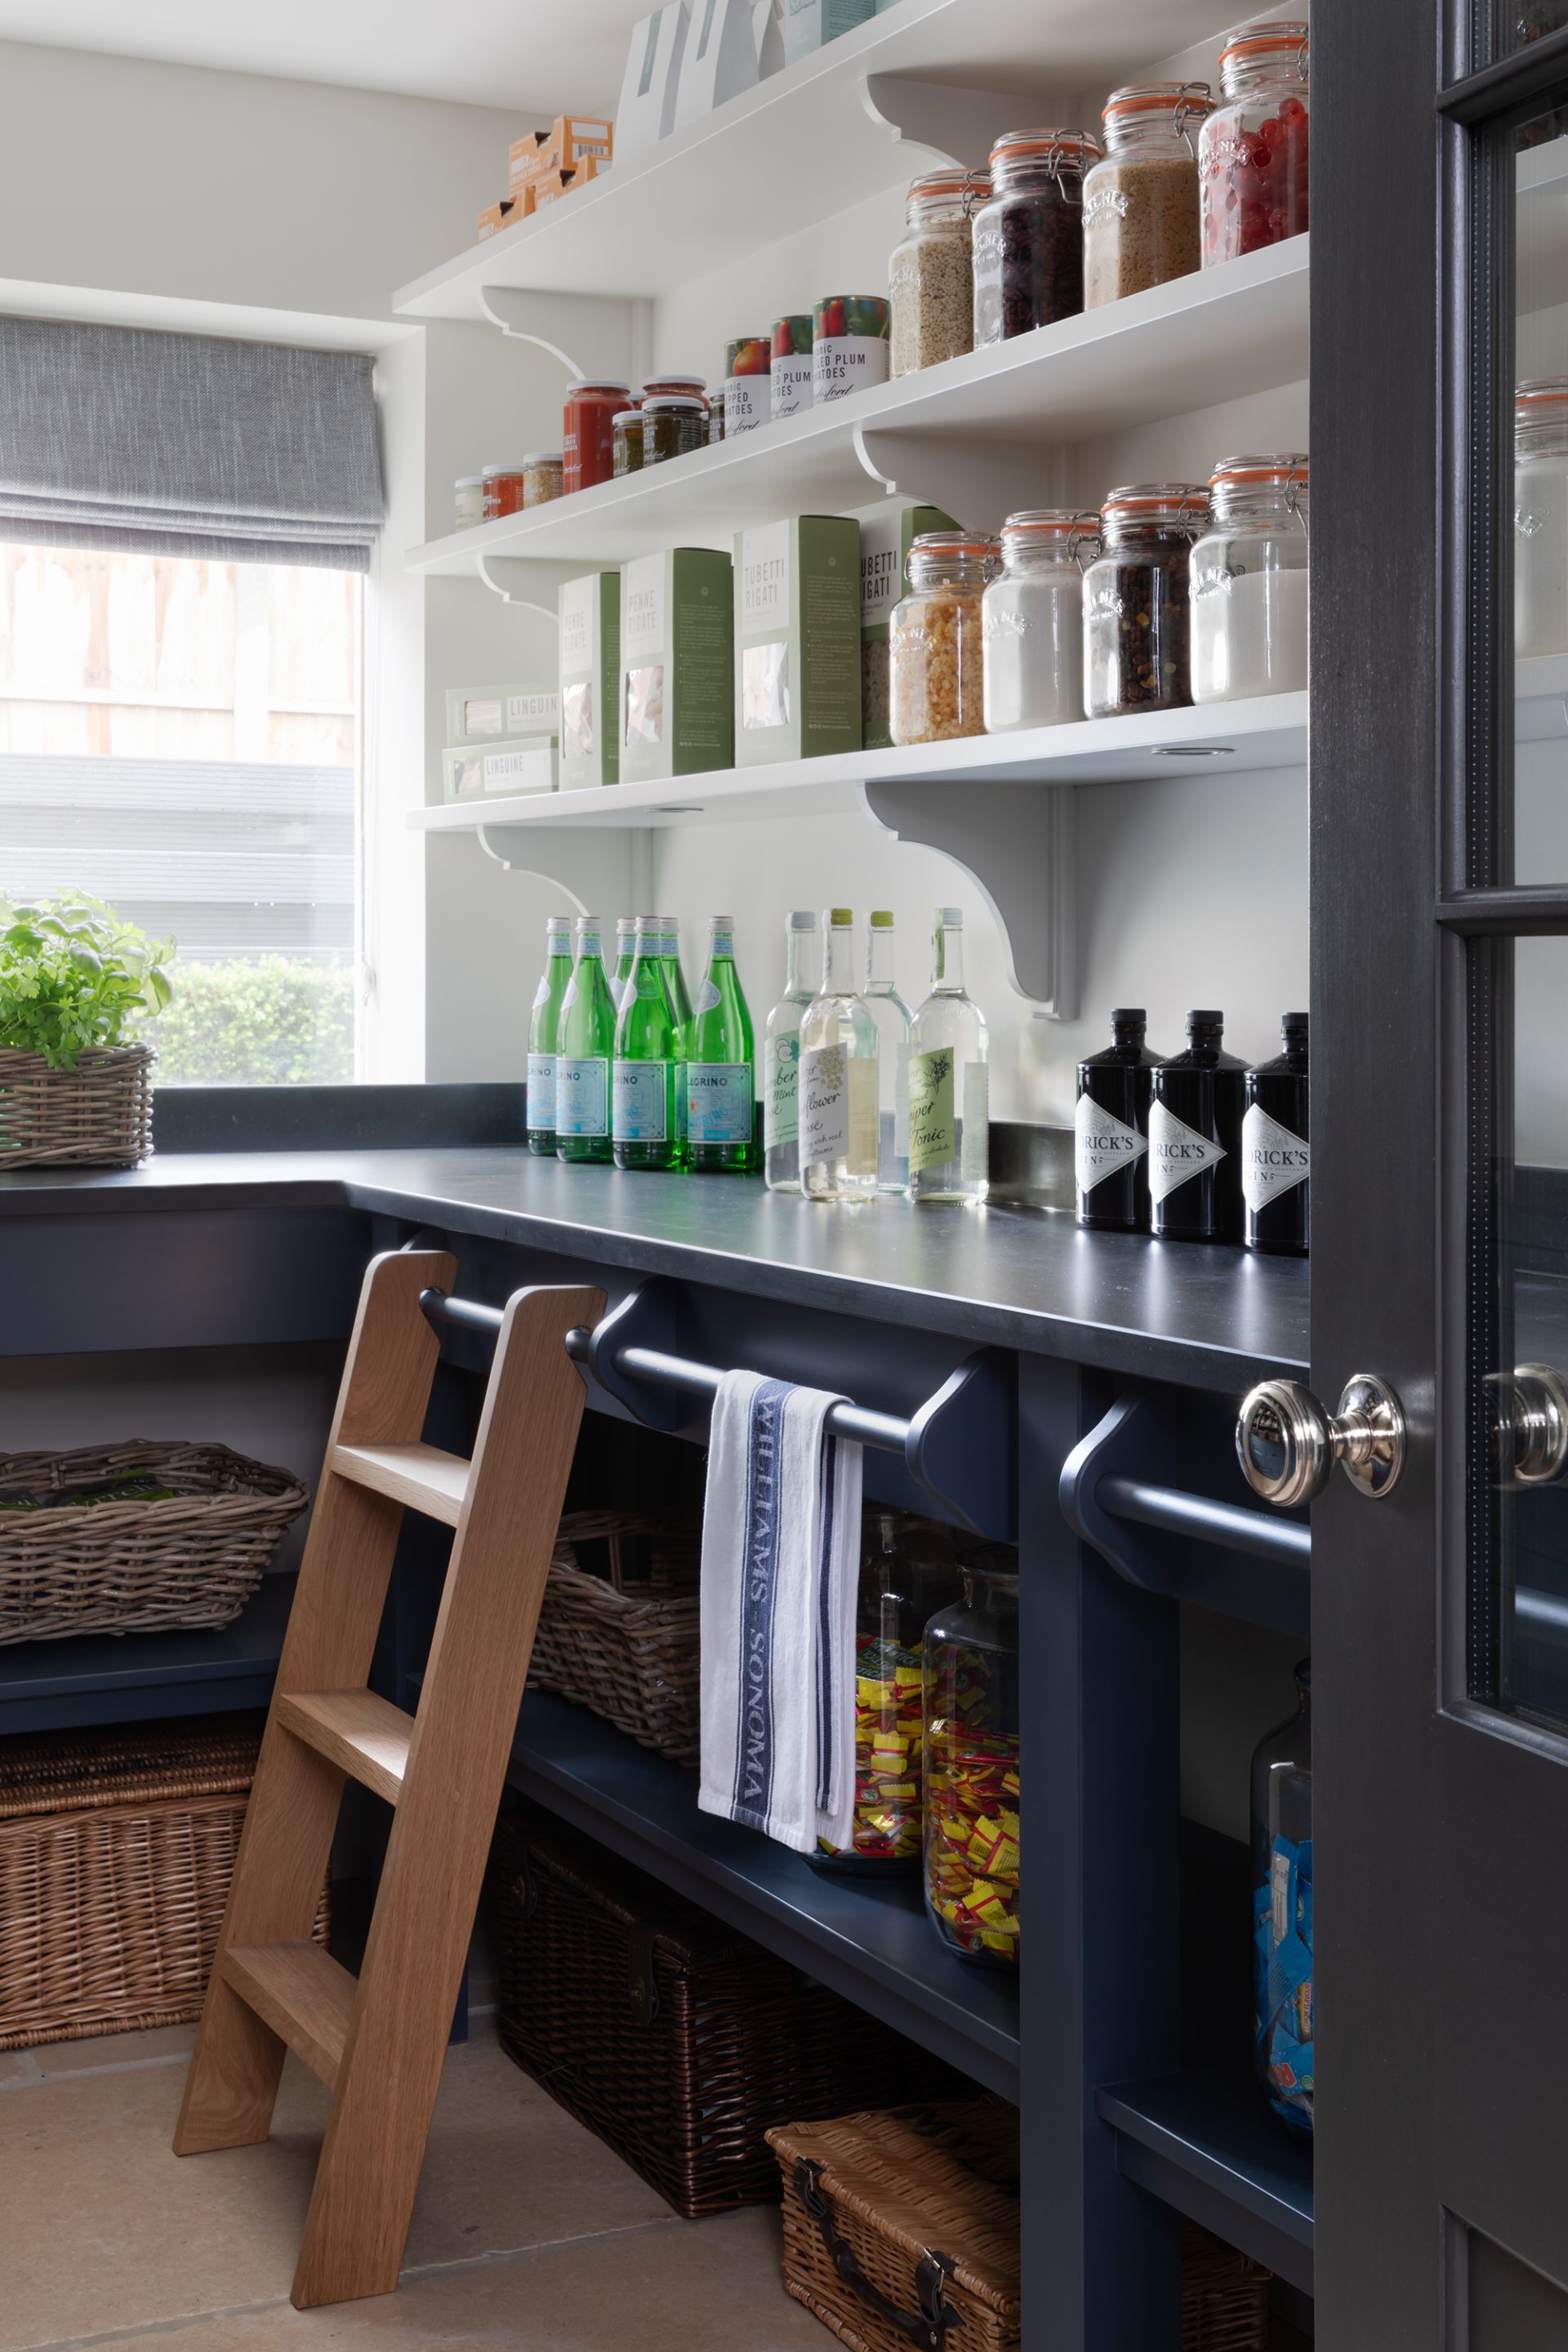 Pantry ideas – versatile ways to design and equip your pantry